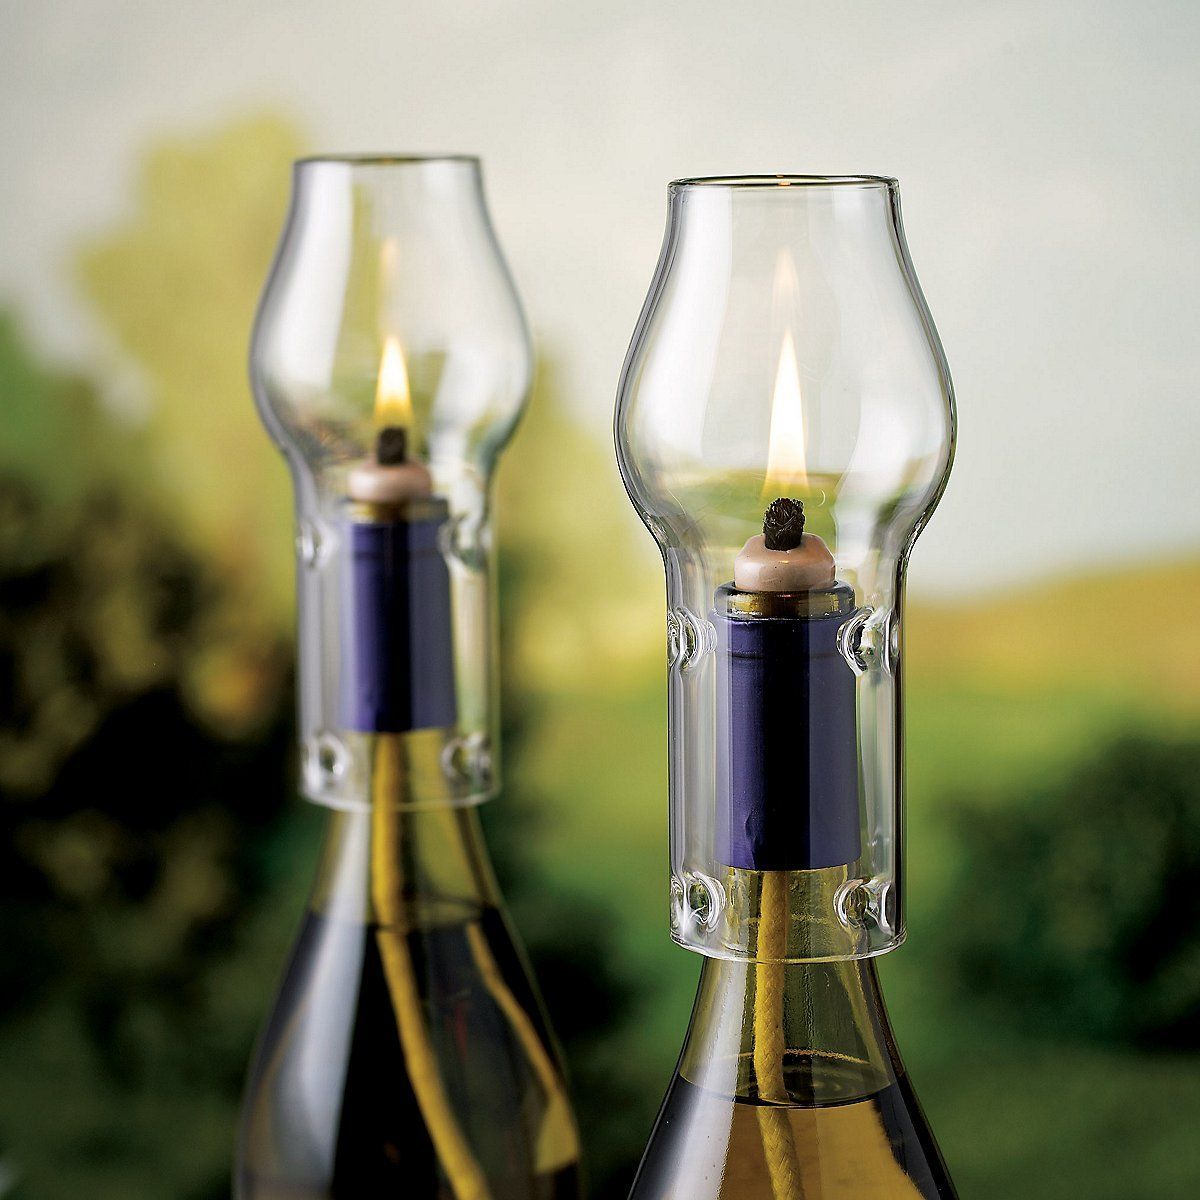 How To Make A Wine Bottle Oil Lamp